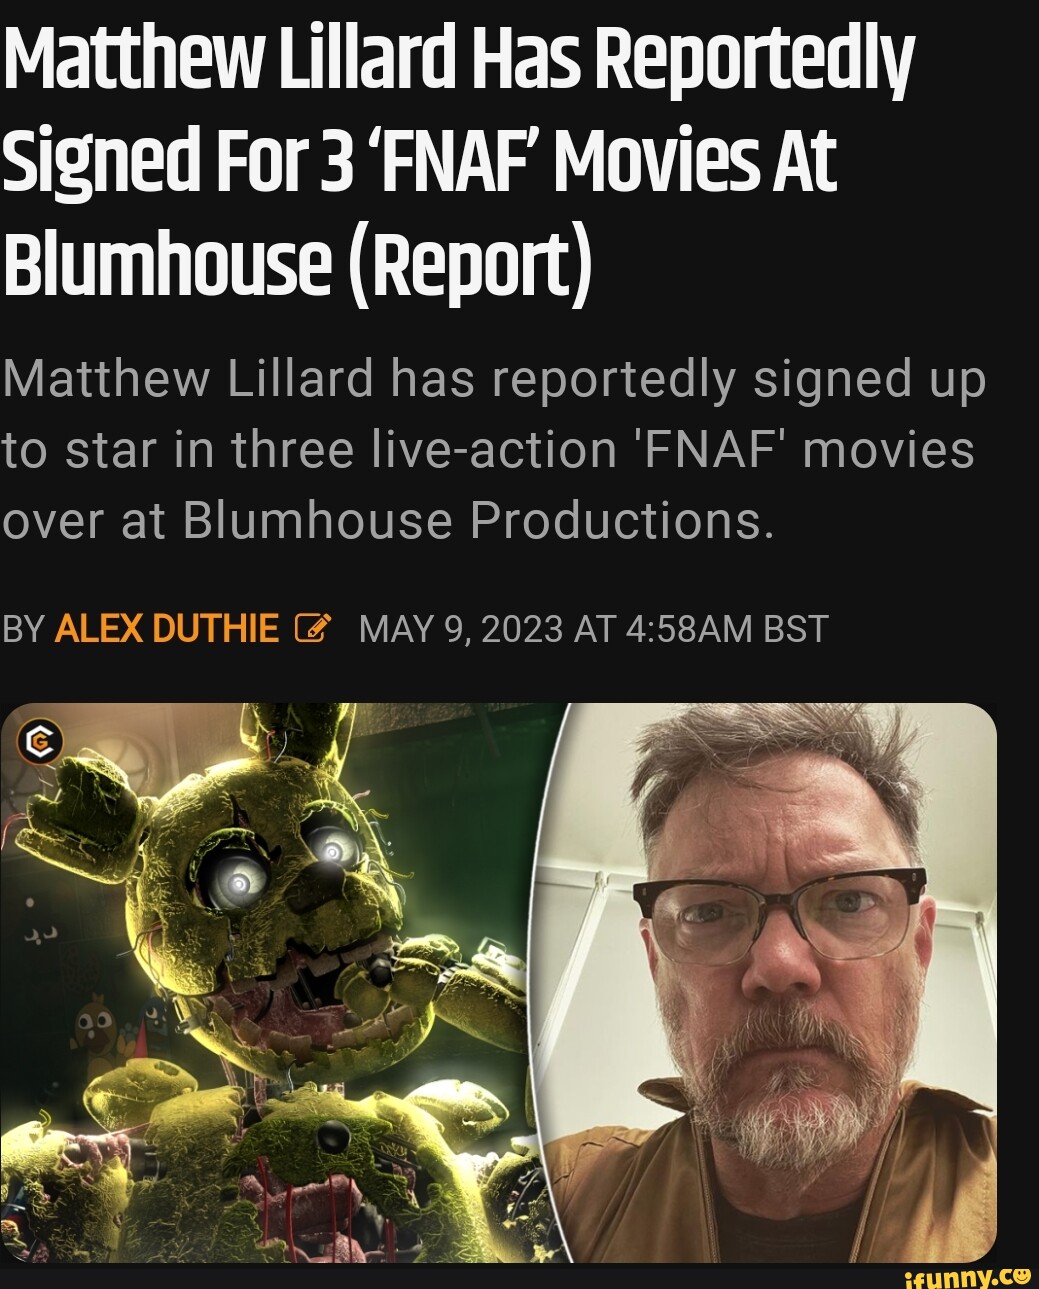 Matthew Lillard Has Reportedly Signed For 3 'FNAF' Movies At Blumhouse  (Report)